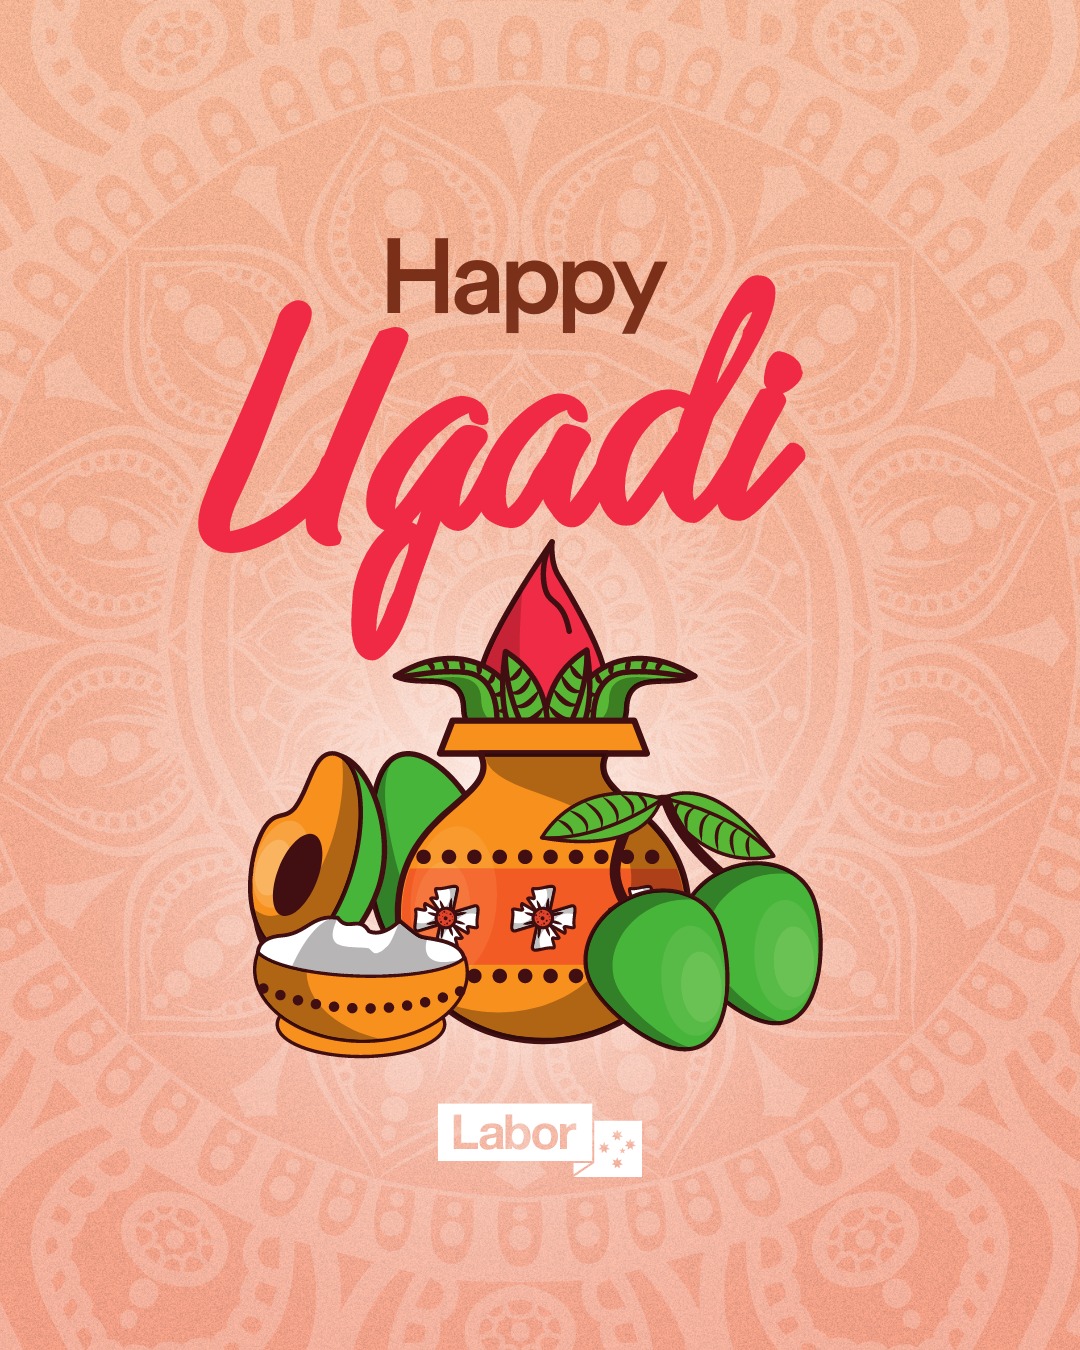 Australian Labor Party: Best wishes to all those celebrating Ugadi and Gudi Padwa! May th…